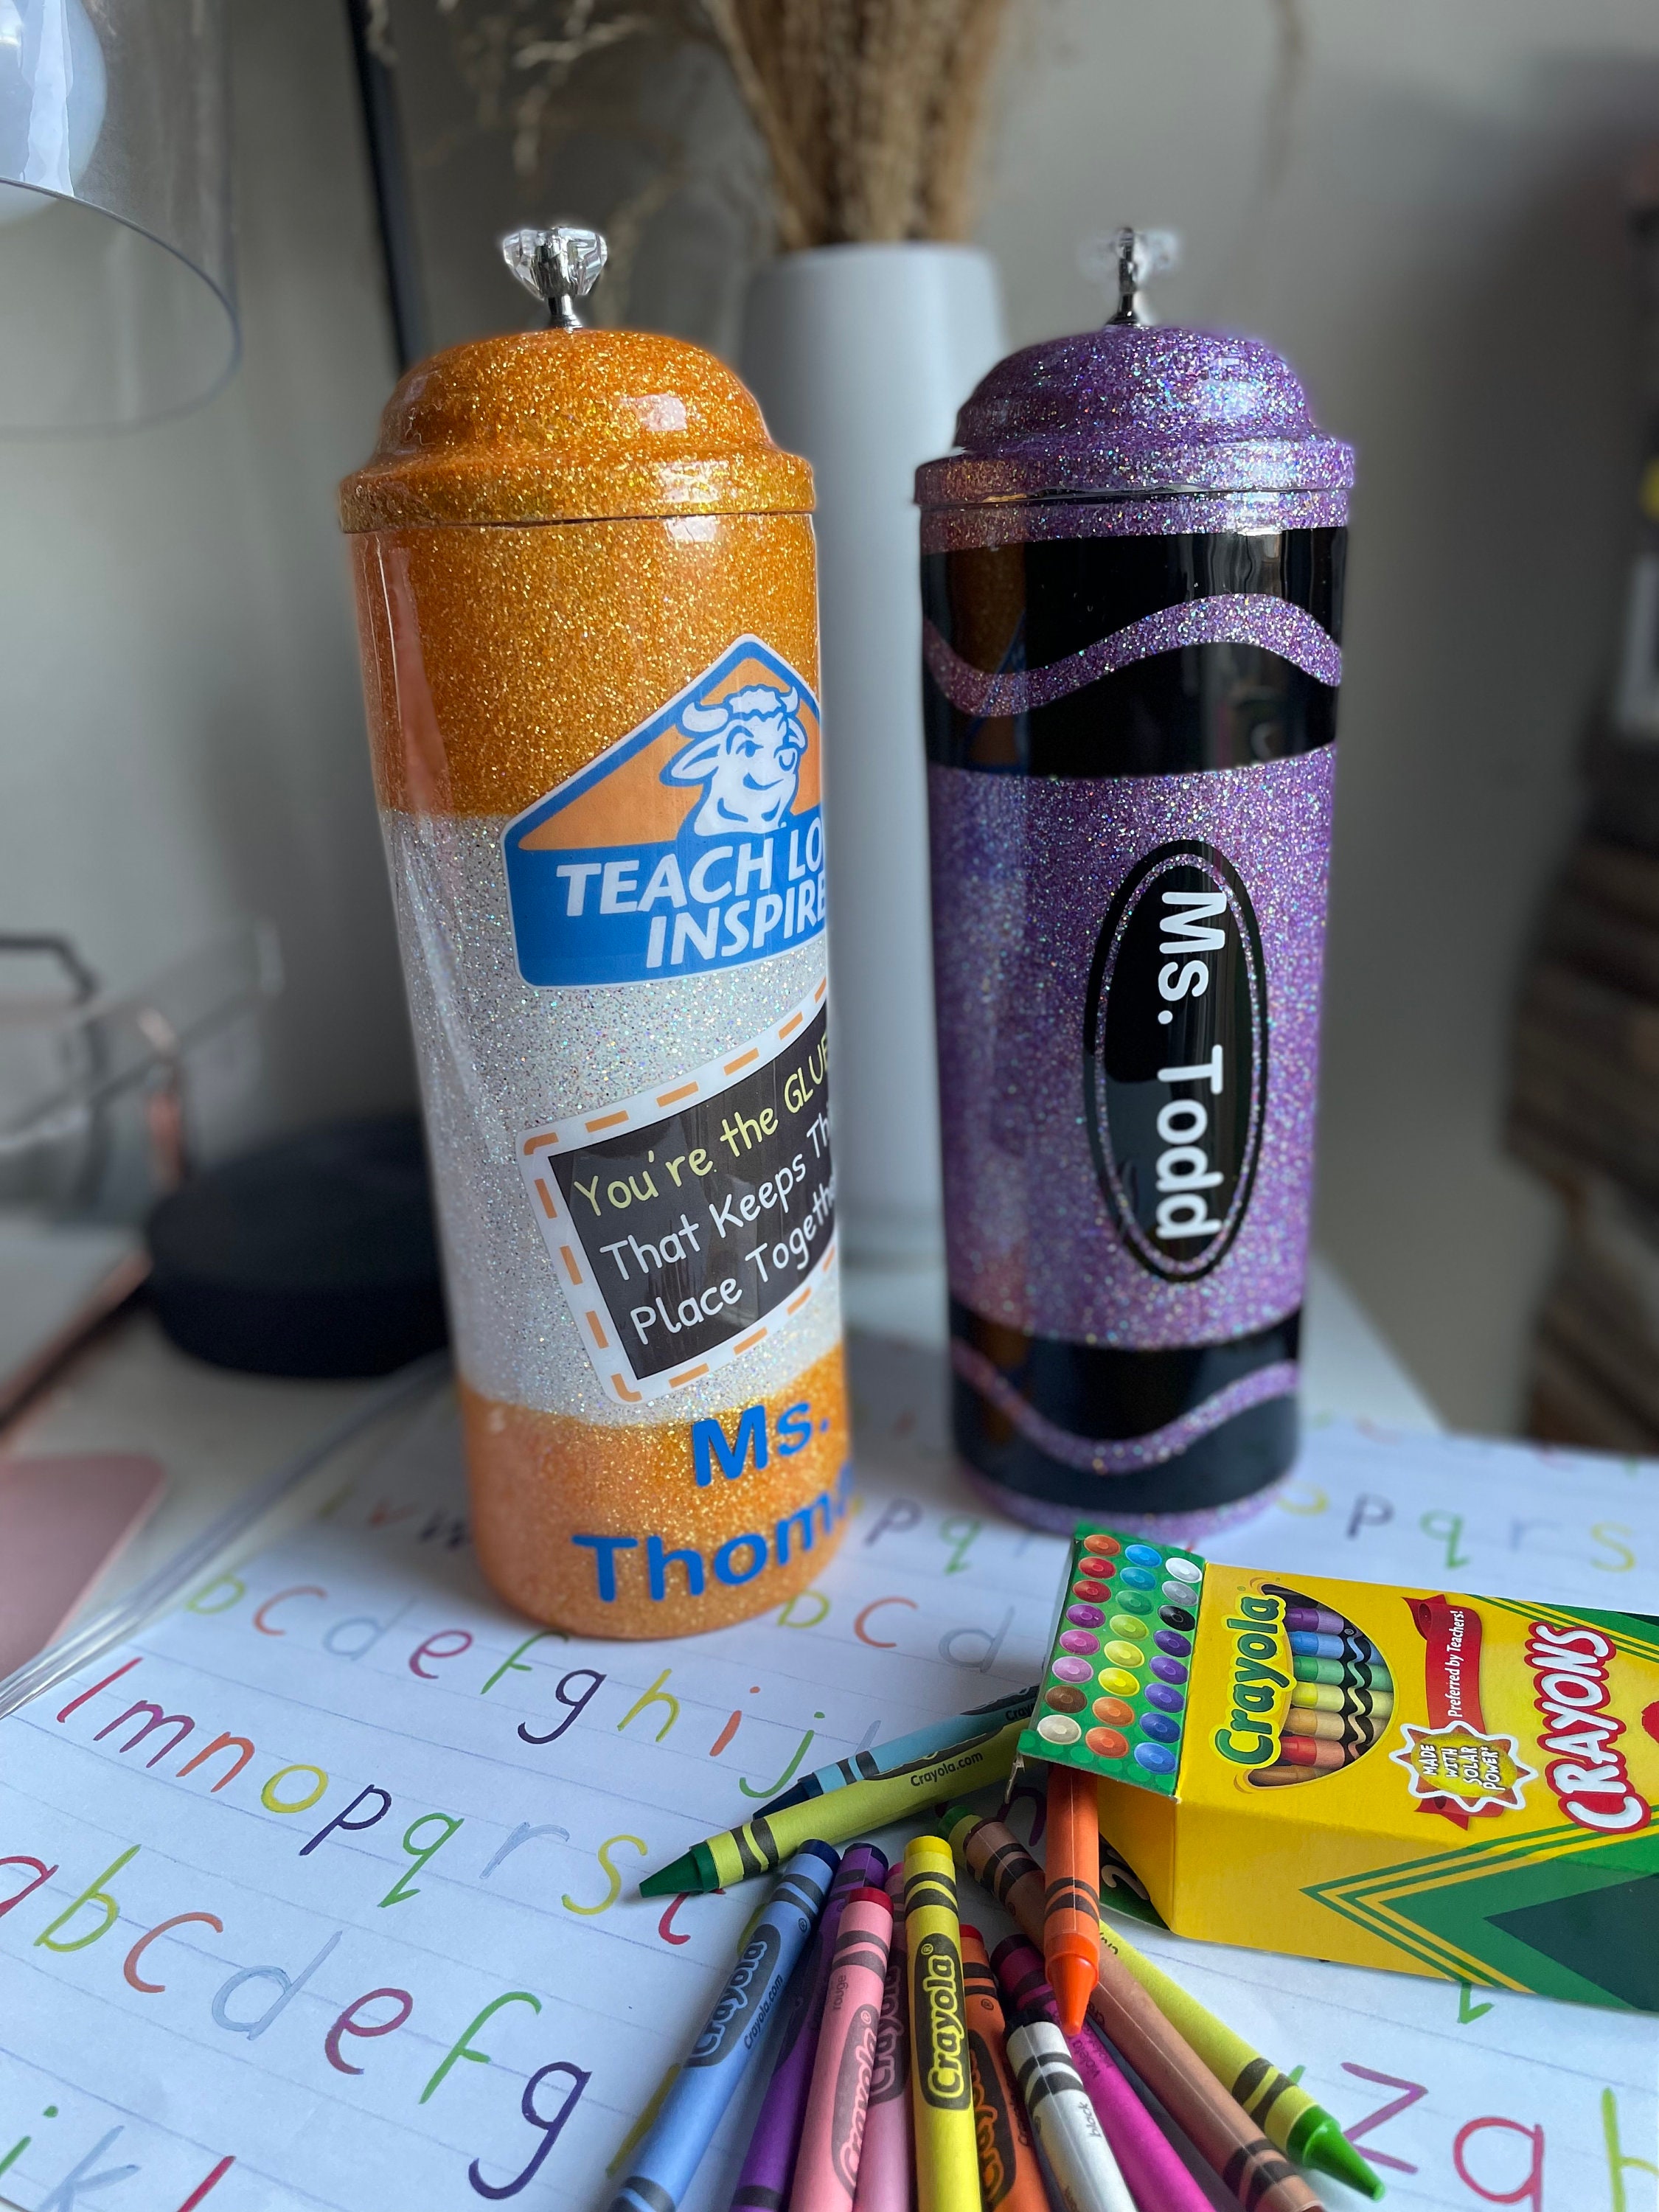 Dollar store straw dispensers turned pencil holders  Teacher appreciation  gifts diy, Homemade teacher gifts, Teachers diy